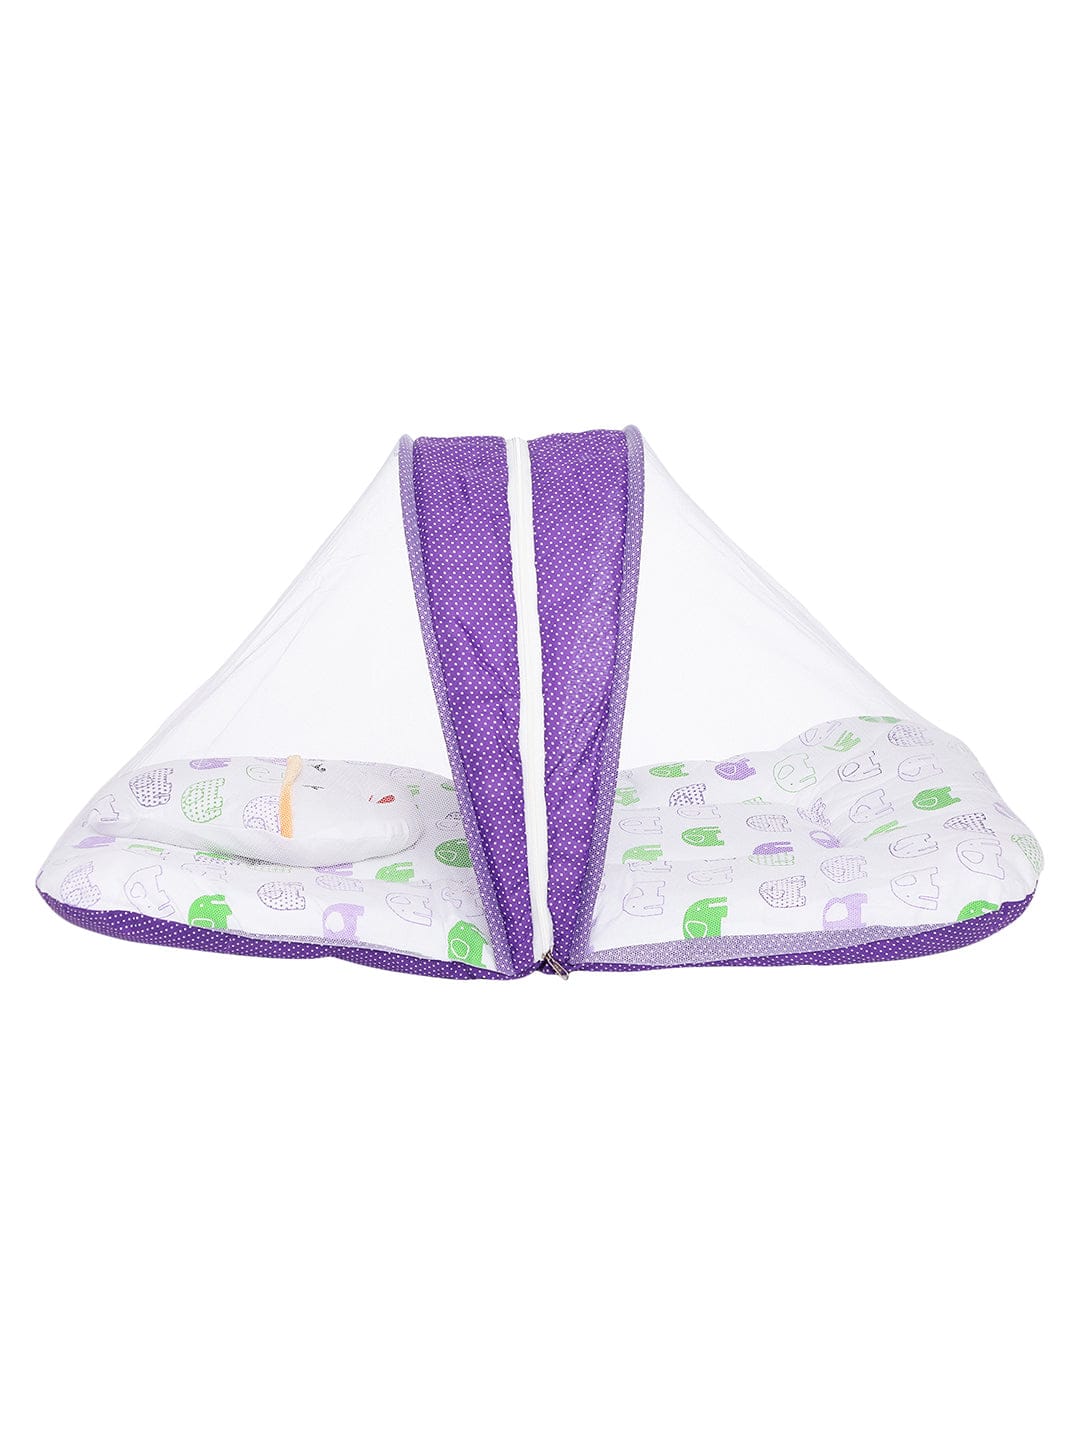 Infants Printed Bedding Set with Mosquito Net (White & Purple)